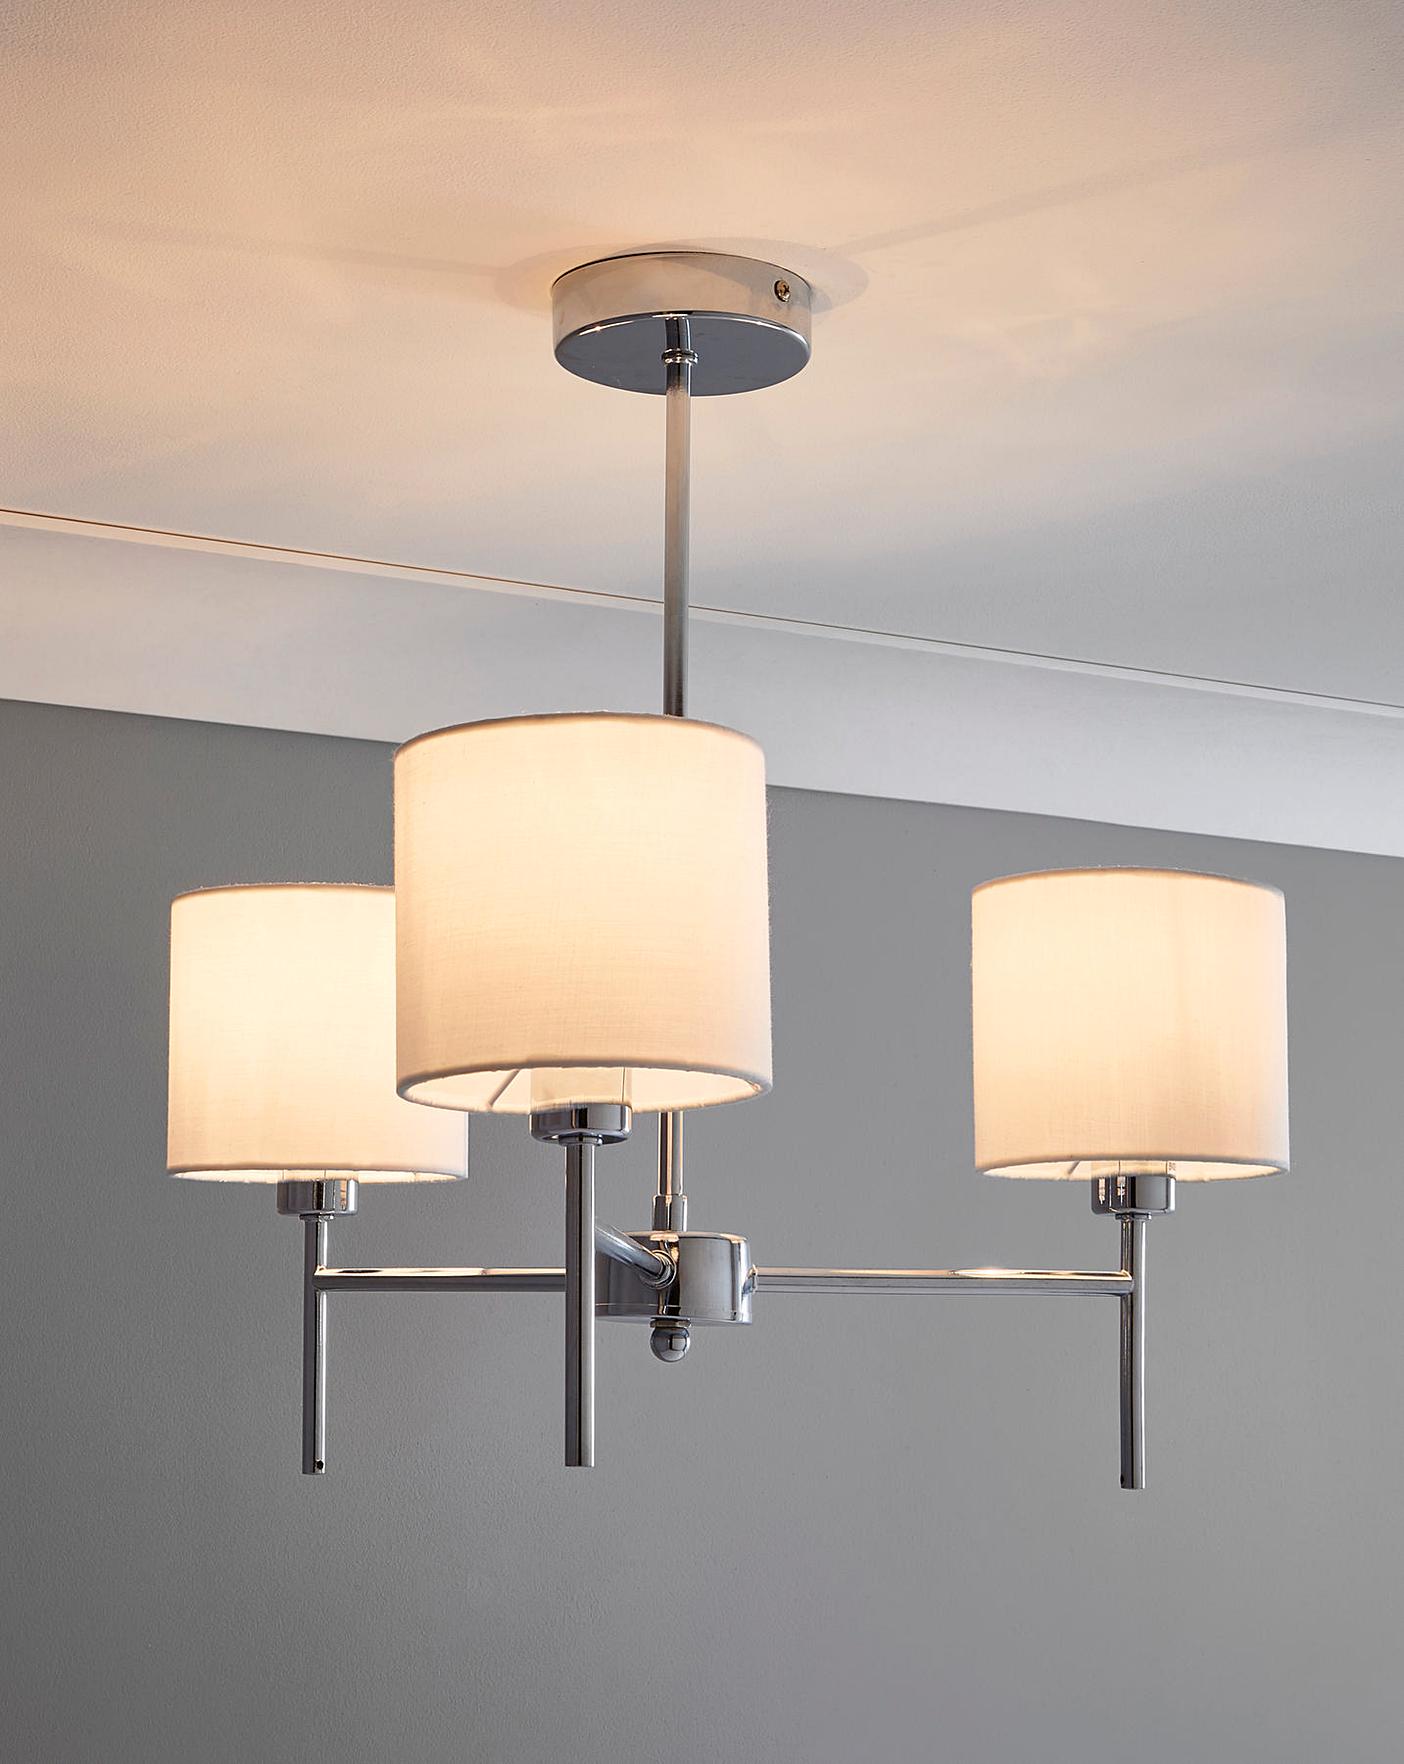 Smith 3 Light Fitted Ceiling Light